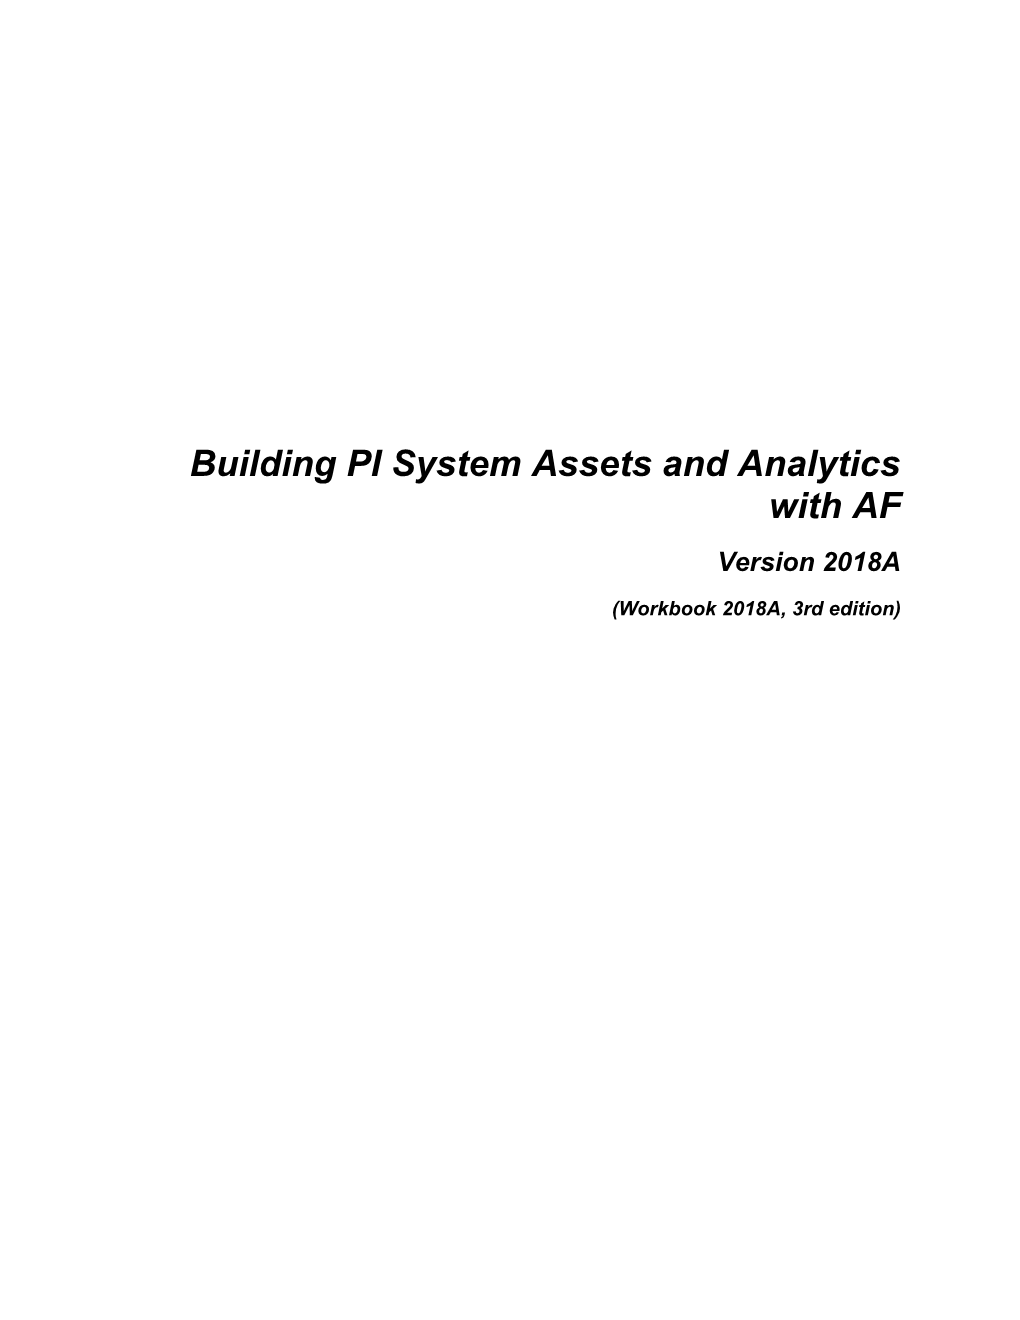 Building PI System Assets and Analytics with AF Version 2018A